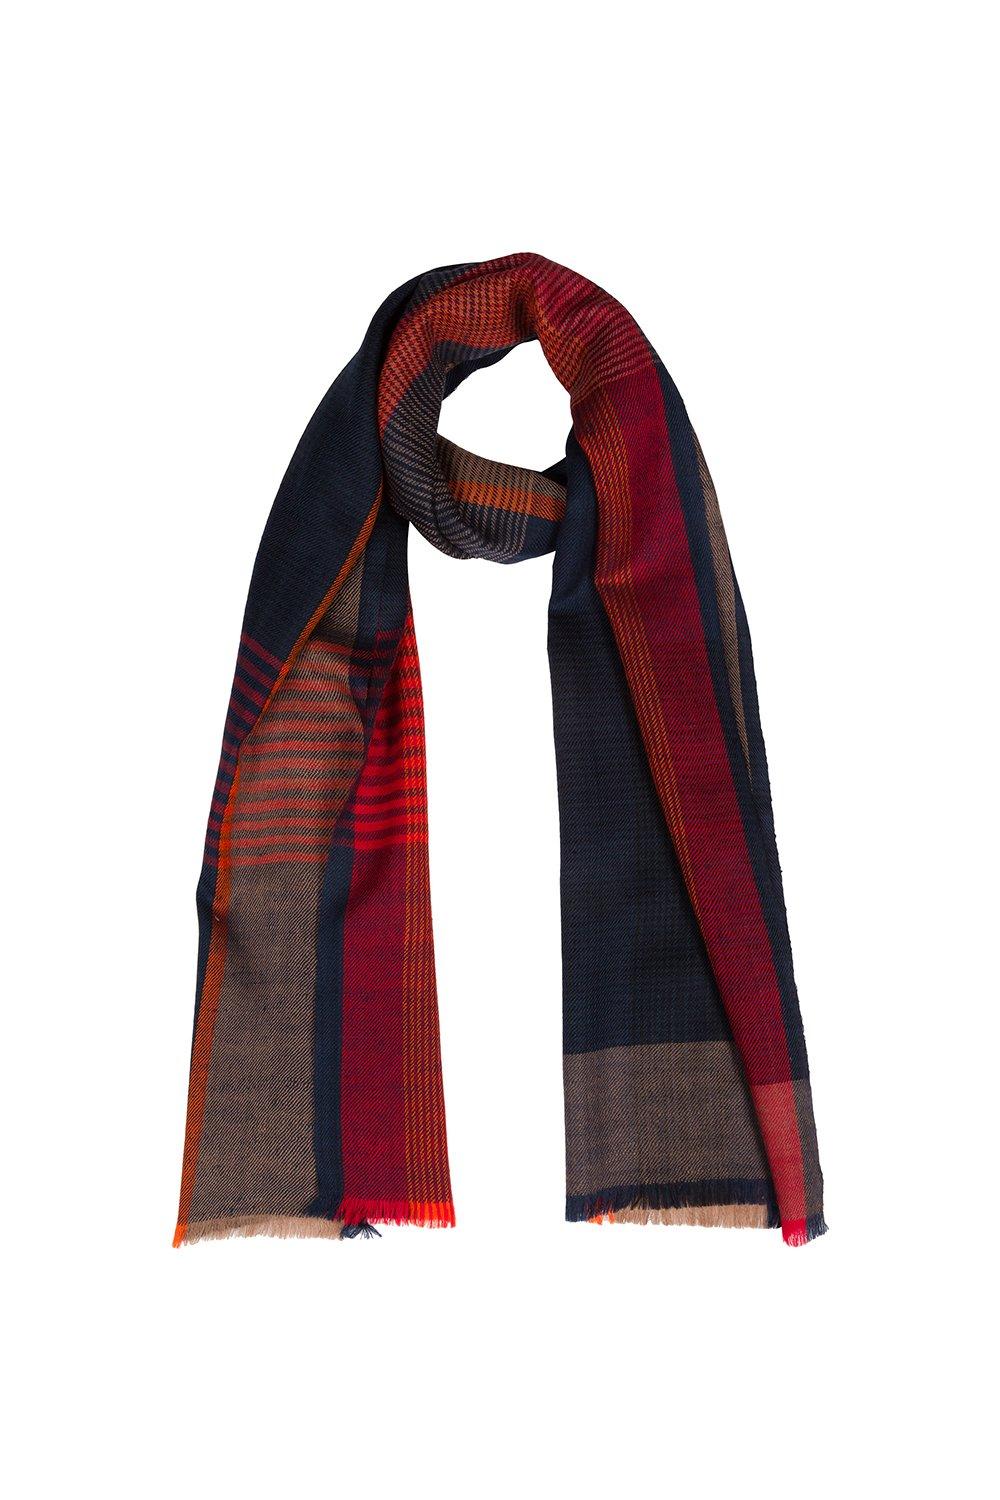 Gloves & Scarves | 'Quasar' Cashmere & Merino Wool Scarf | Pure ...